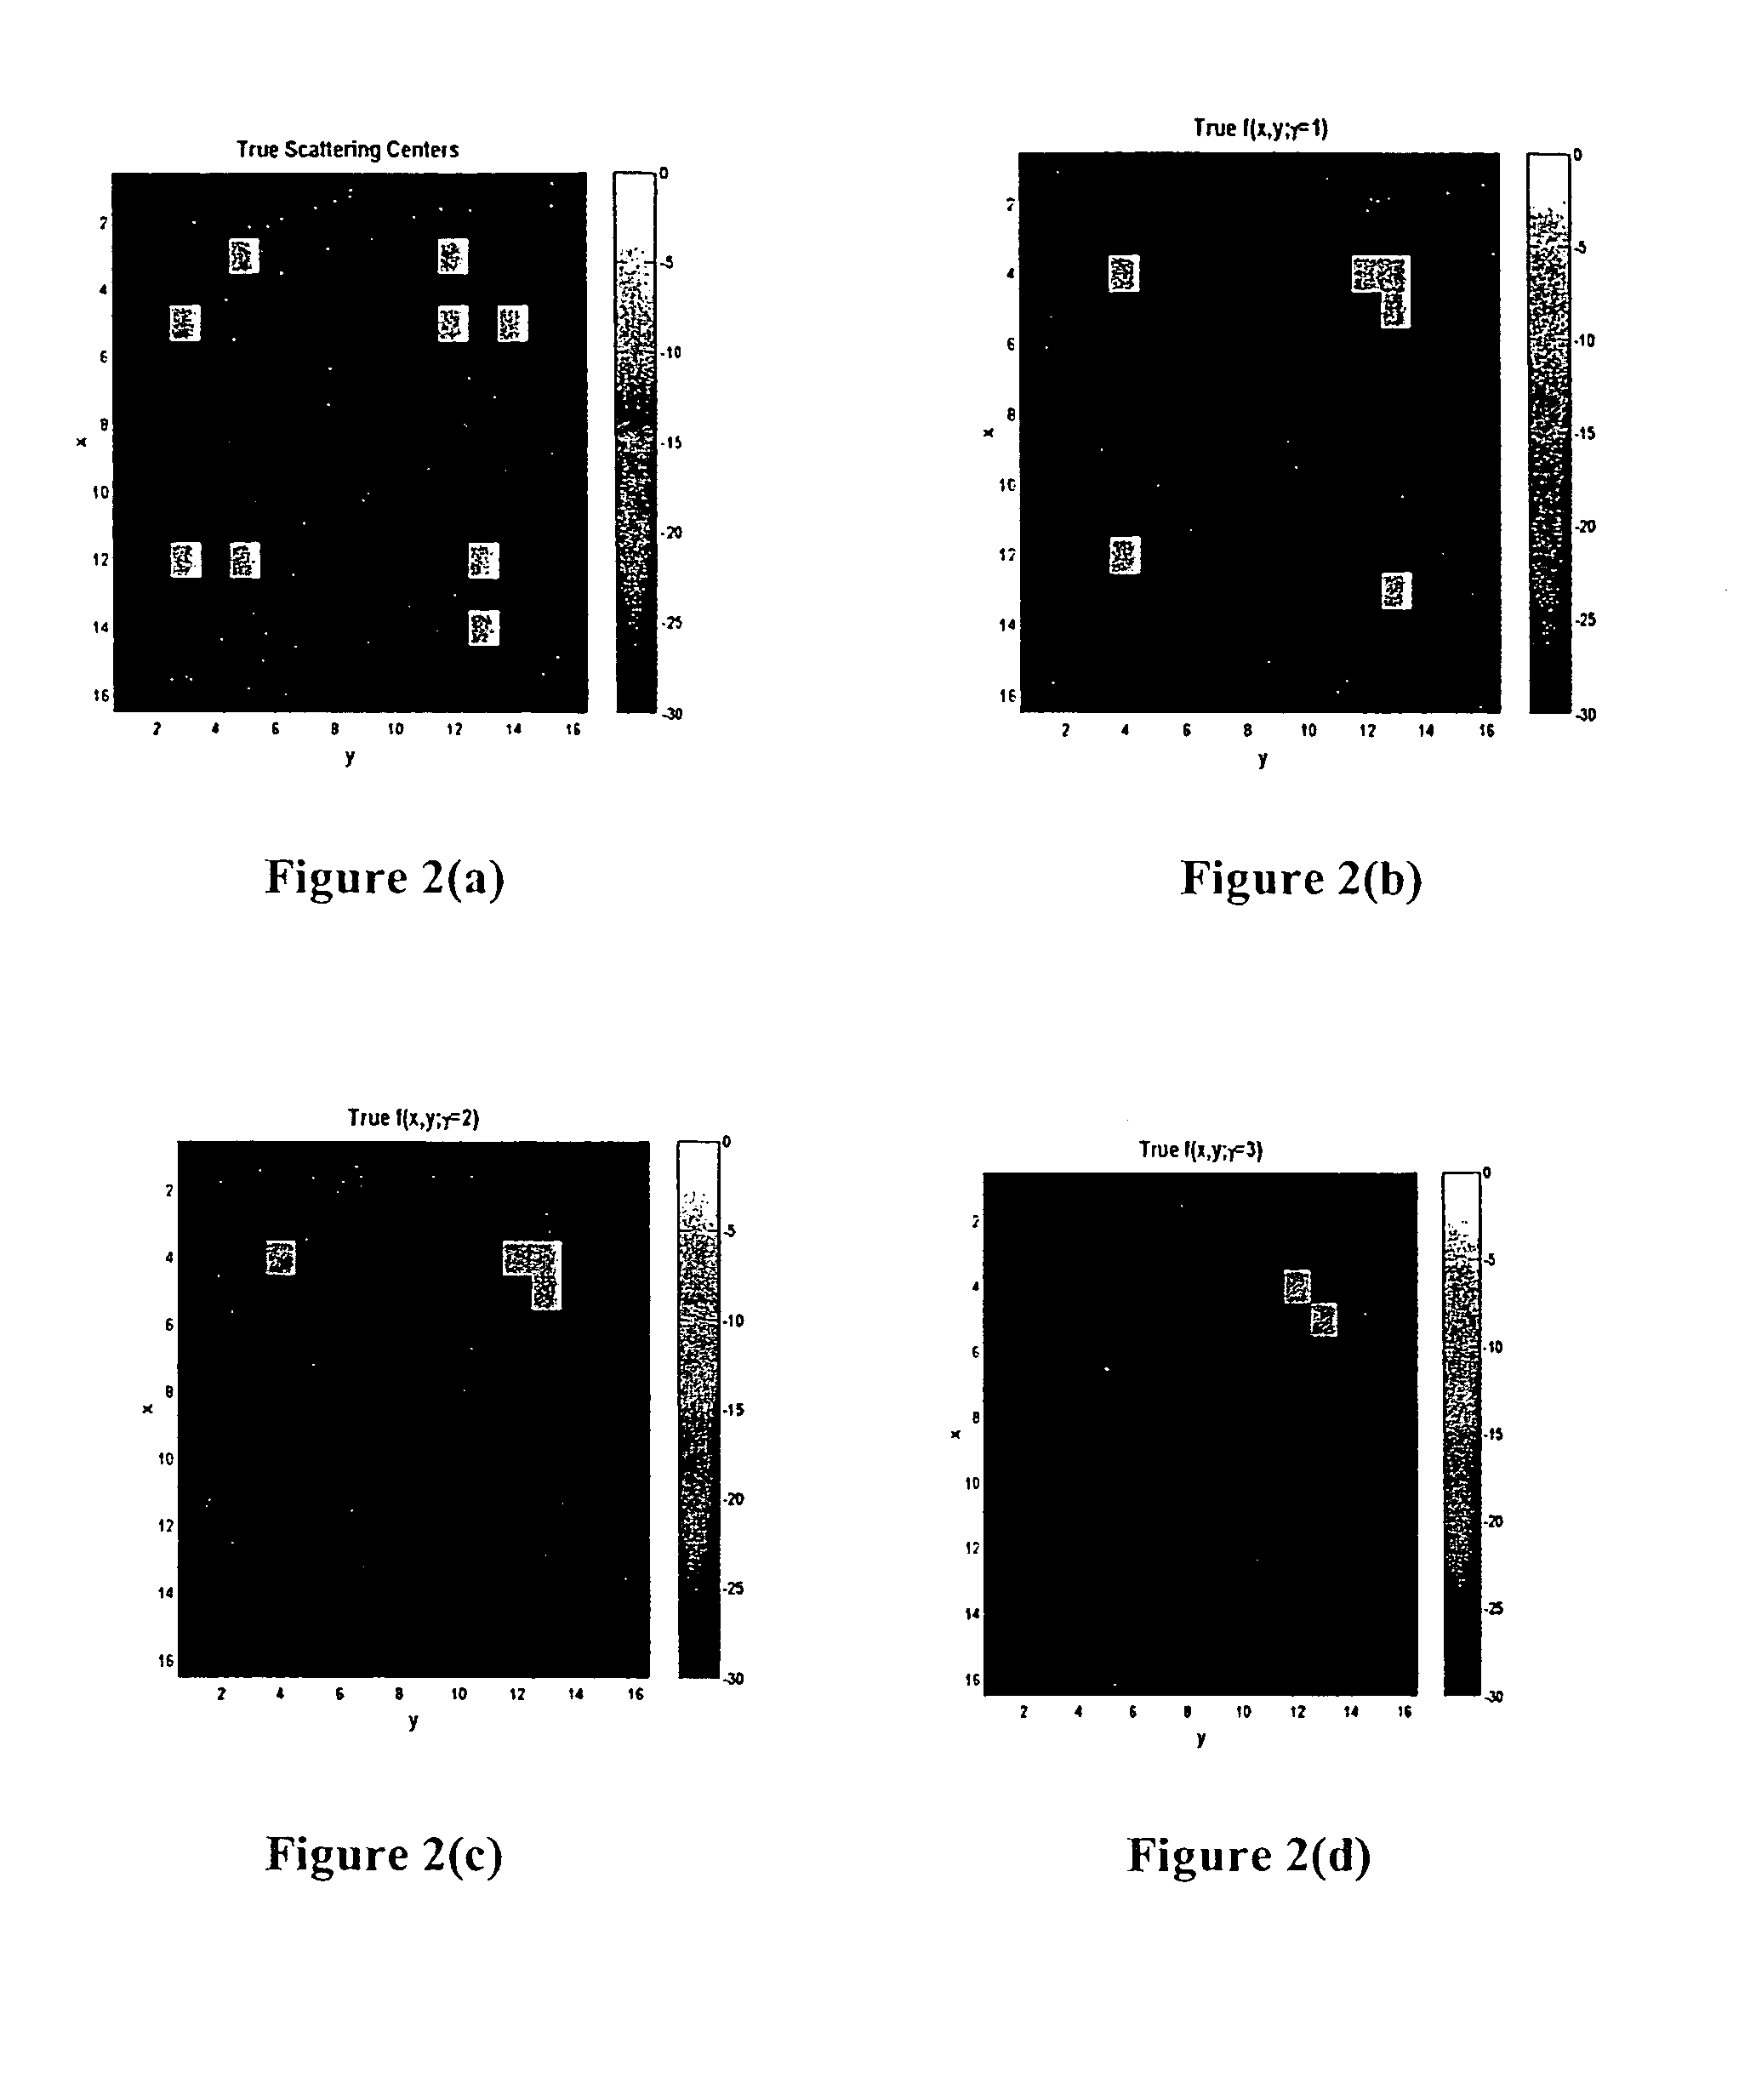 Method for developing and using an image reconstruction algorithm for multipath scattering